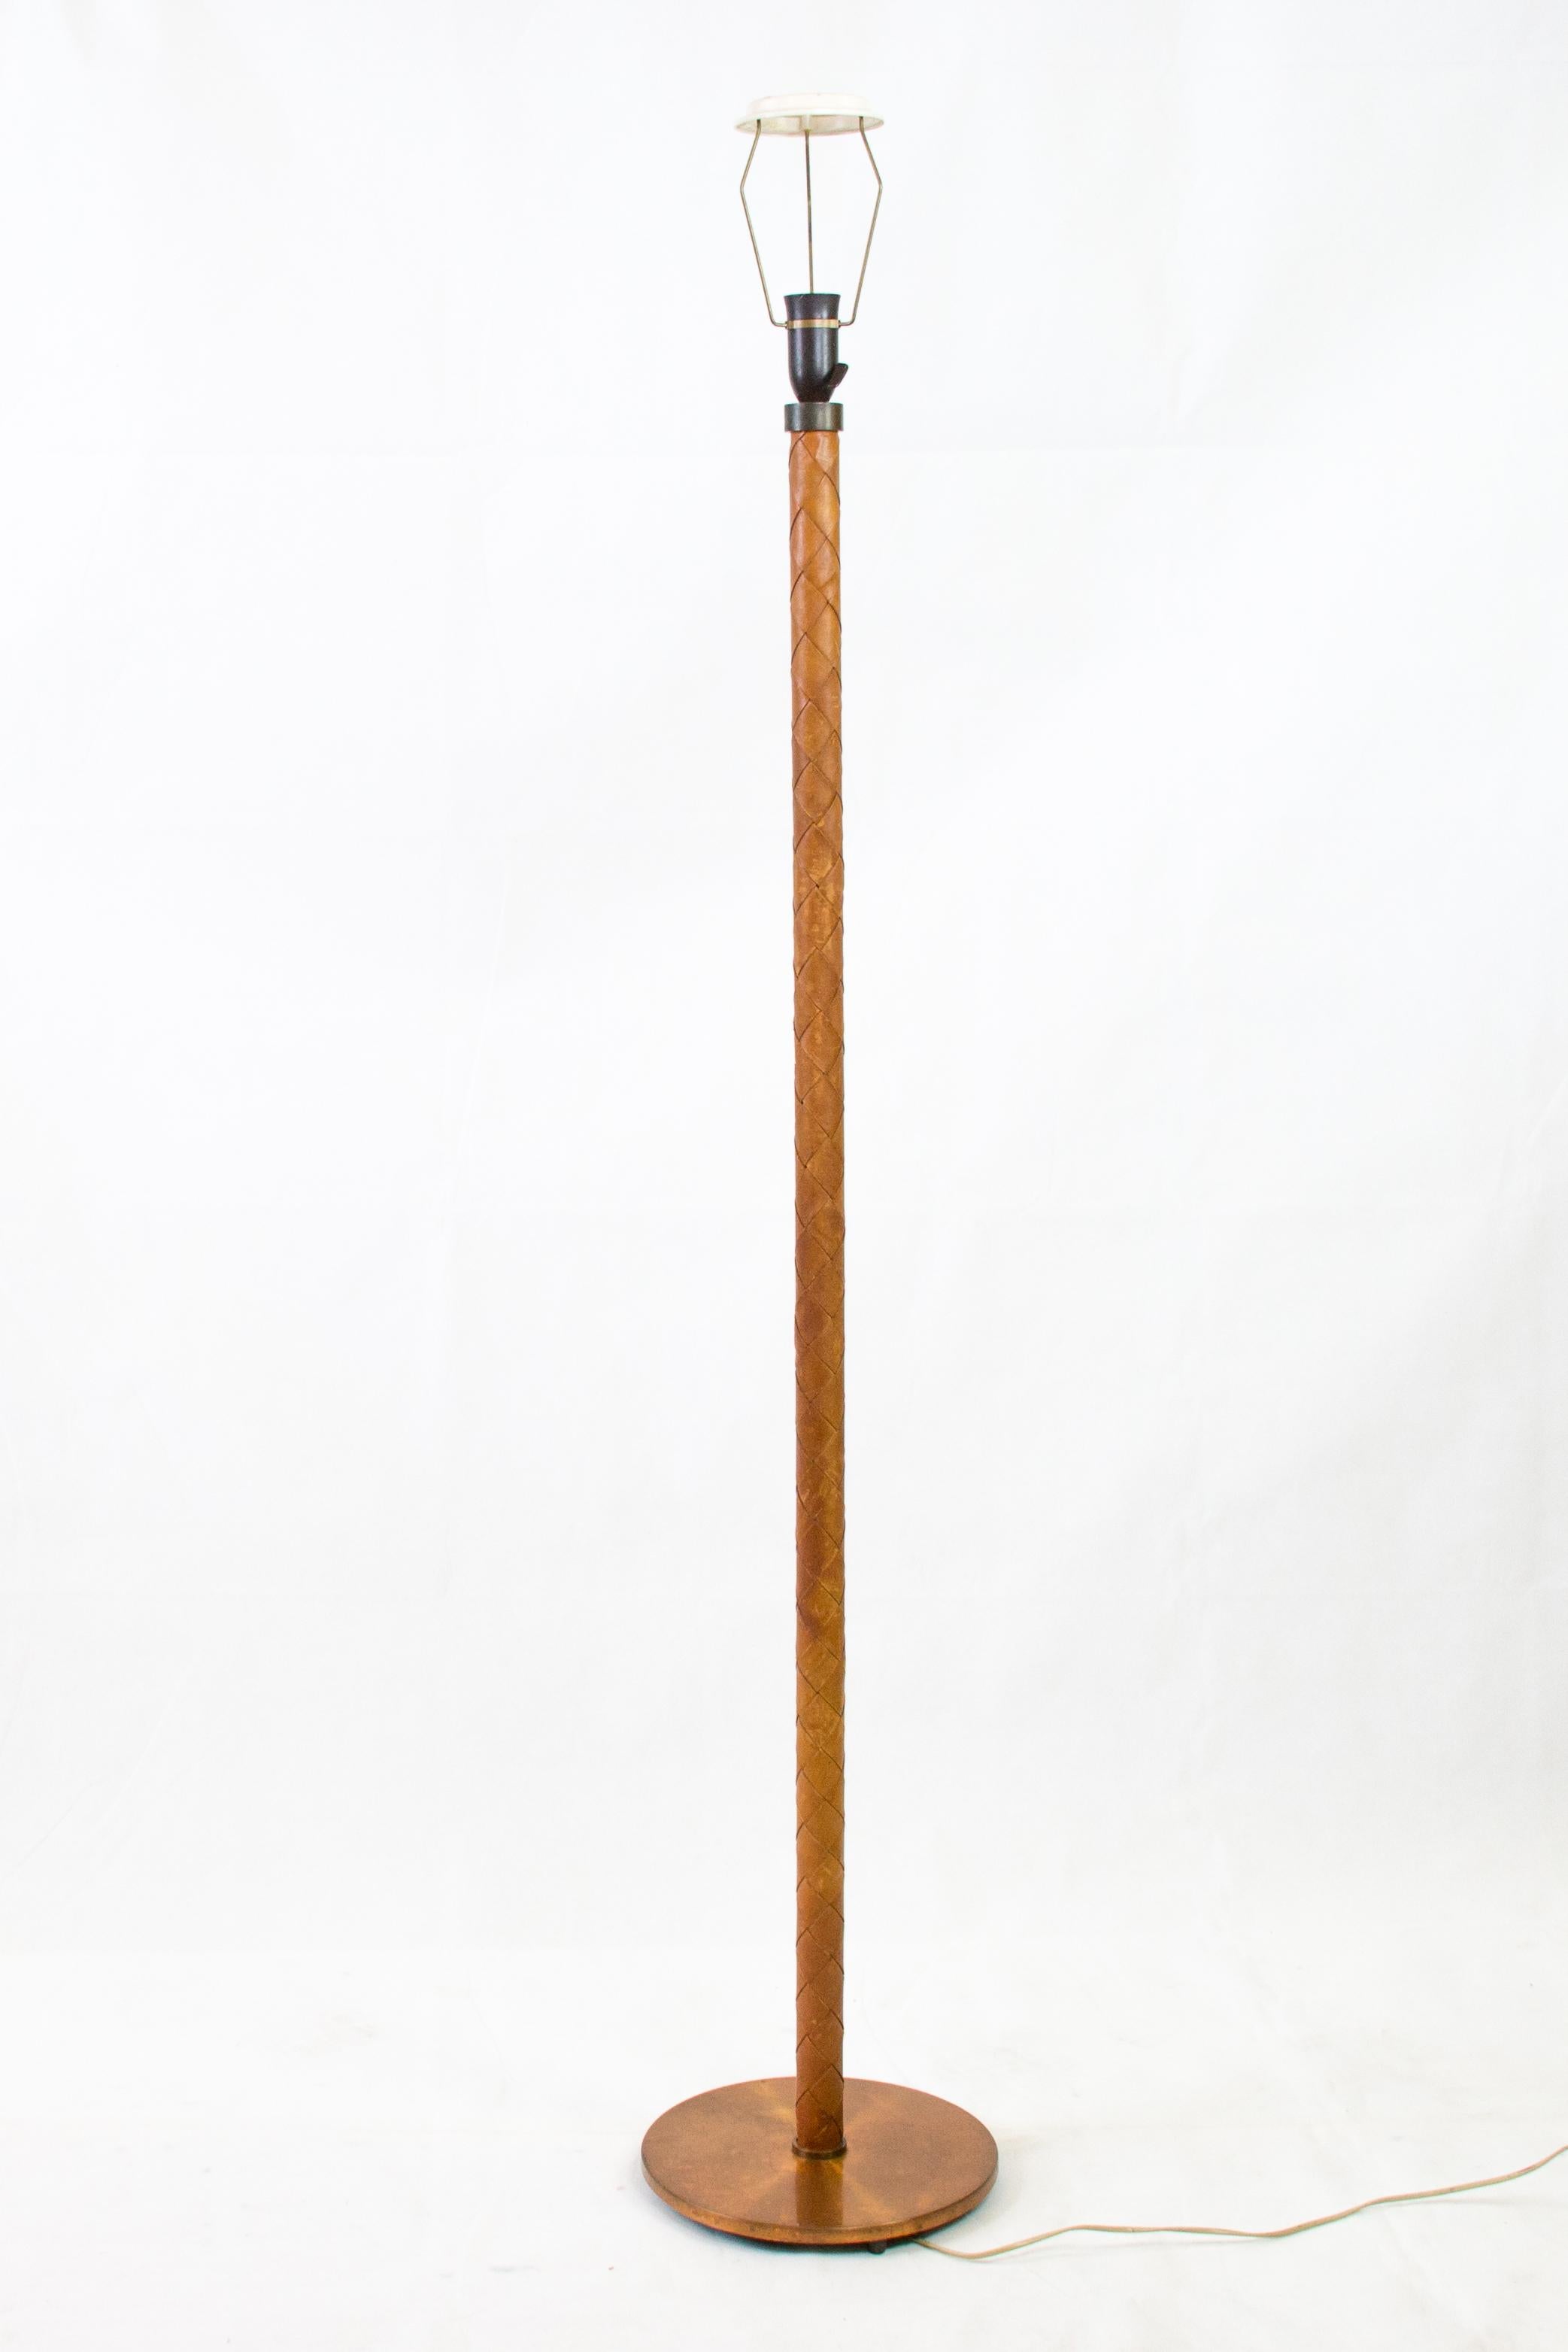 Rare floorlamp with braided leather shaft and copper foot
designed by Johannes Hammerborg for Fog & Morup